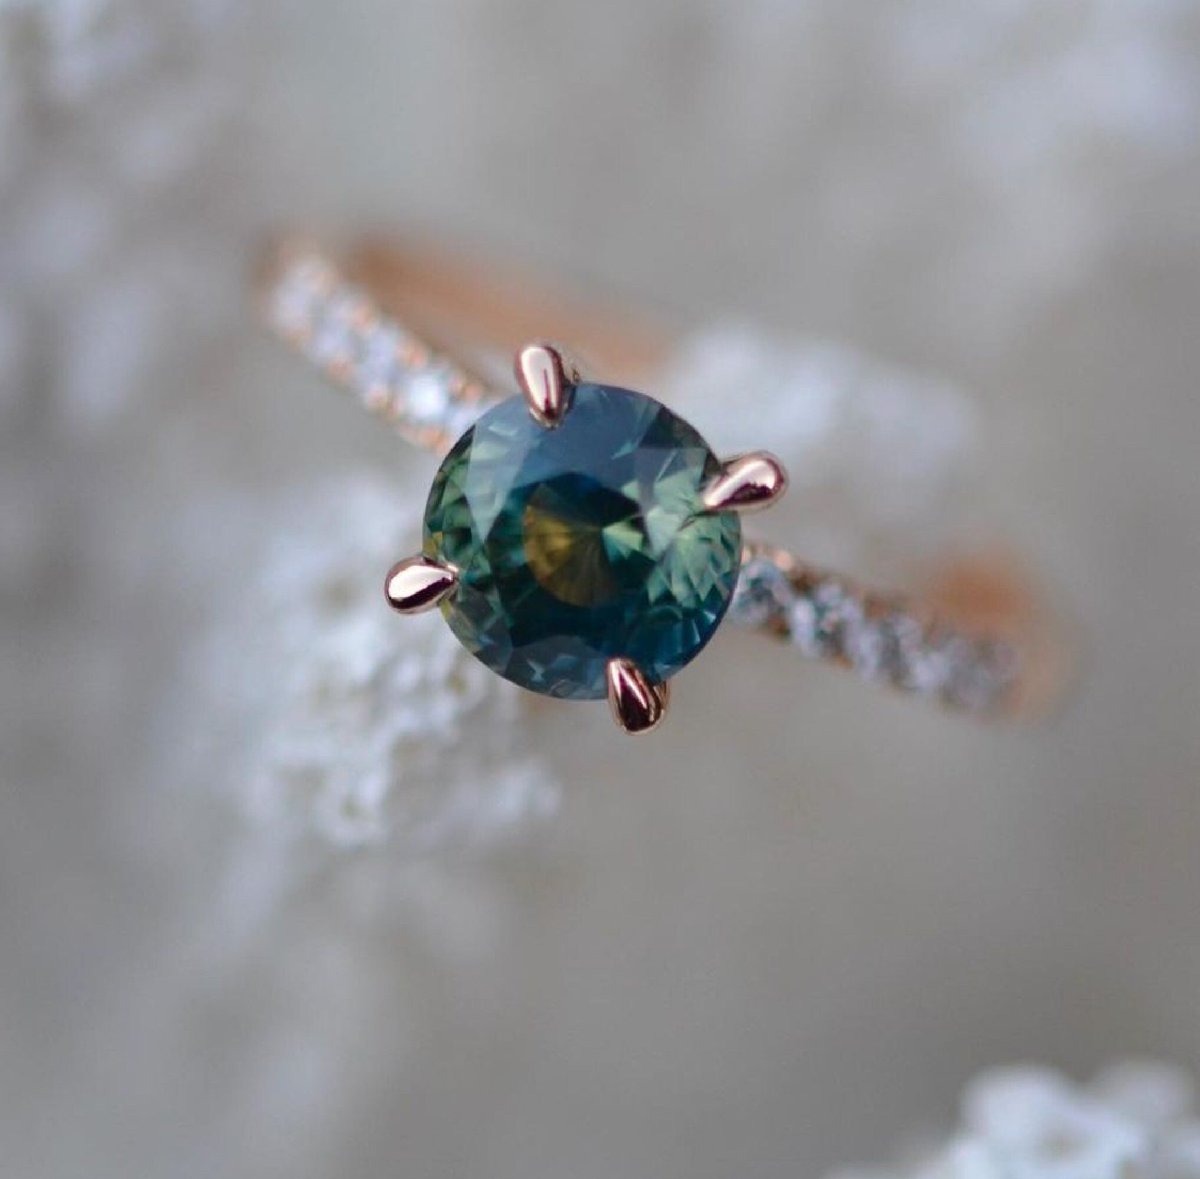 Excited to share the latest addition to my #etsy shop: Peacock Sapphir Ring, 1.6 Carat Round Cut Green Blue Sapphire Engagement Ring, Blue Green Sapphire Promise Ring  https://t.co/aT7KUBkTK1 #rosegold #round #moissanite #engagement #wedding #goldring #sapphirering https://t.co/SSUpq6sVE4